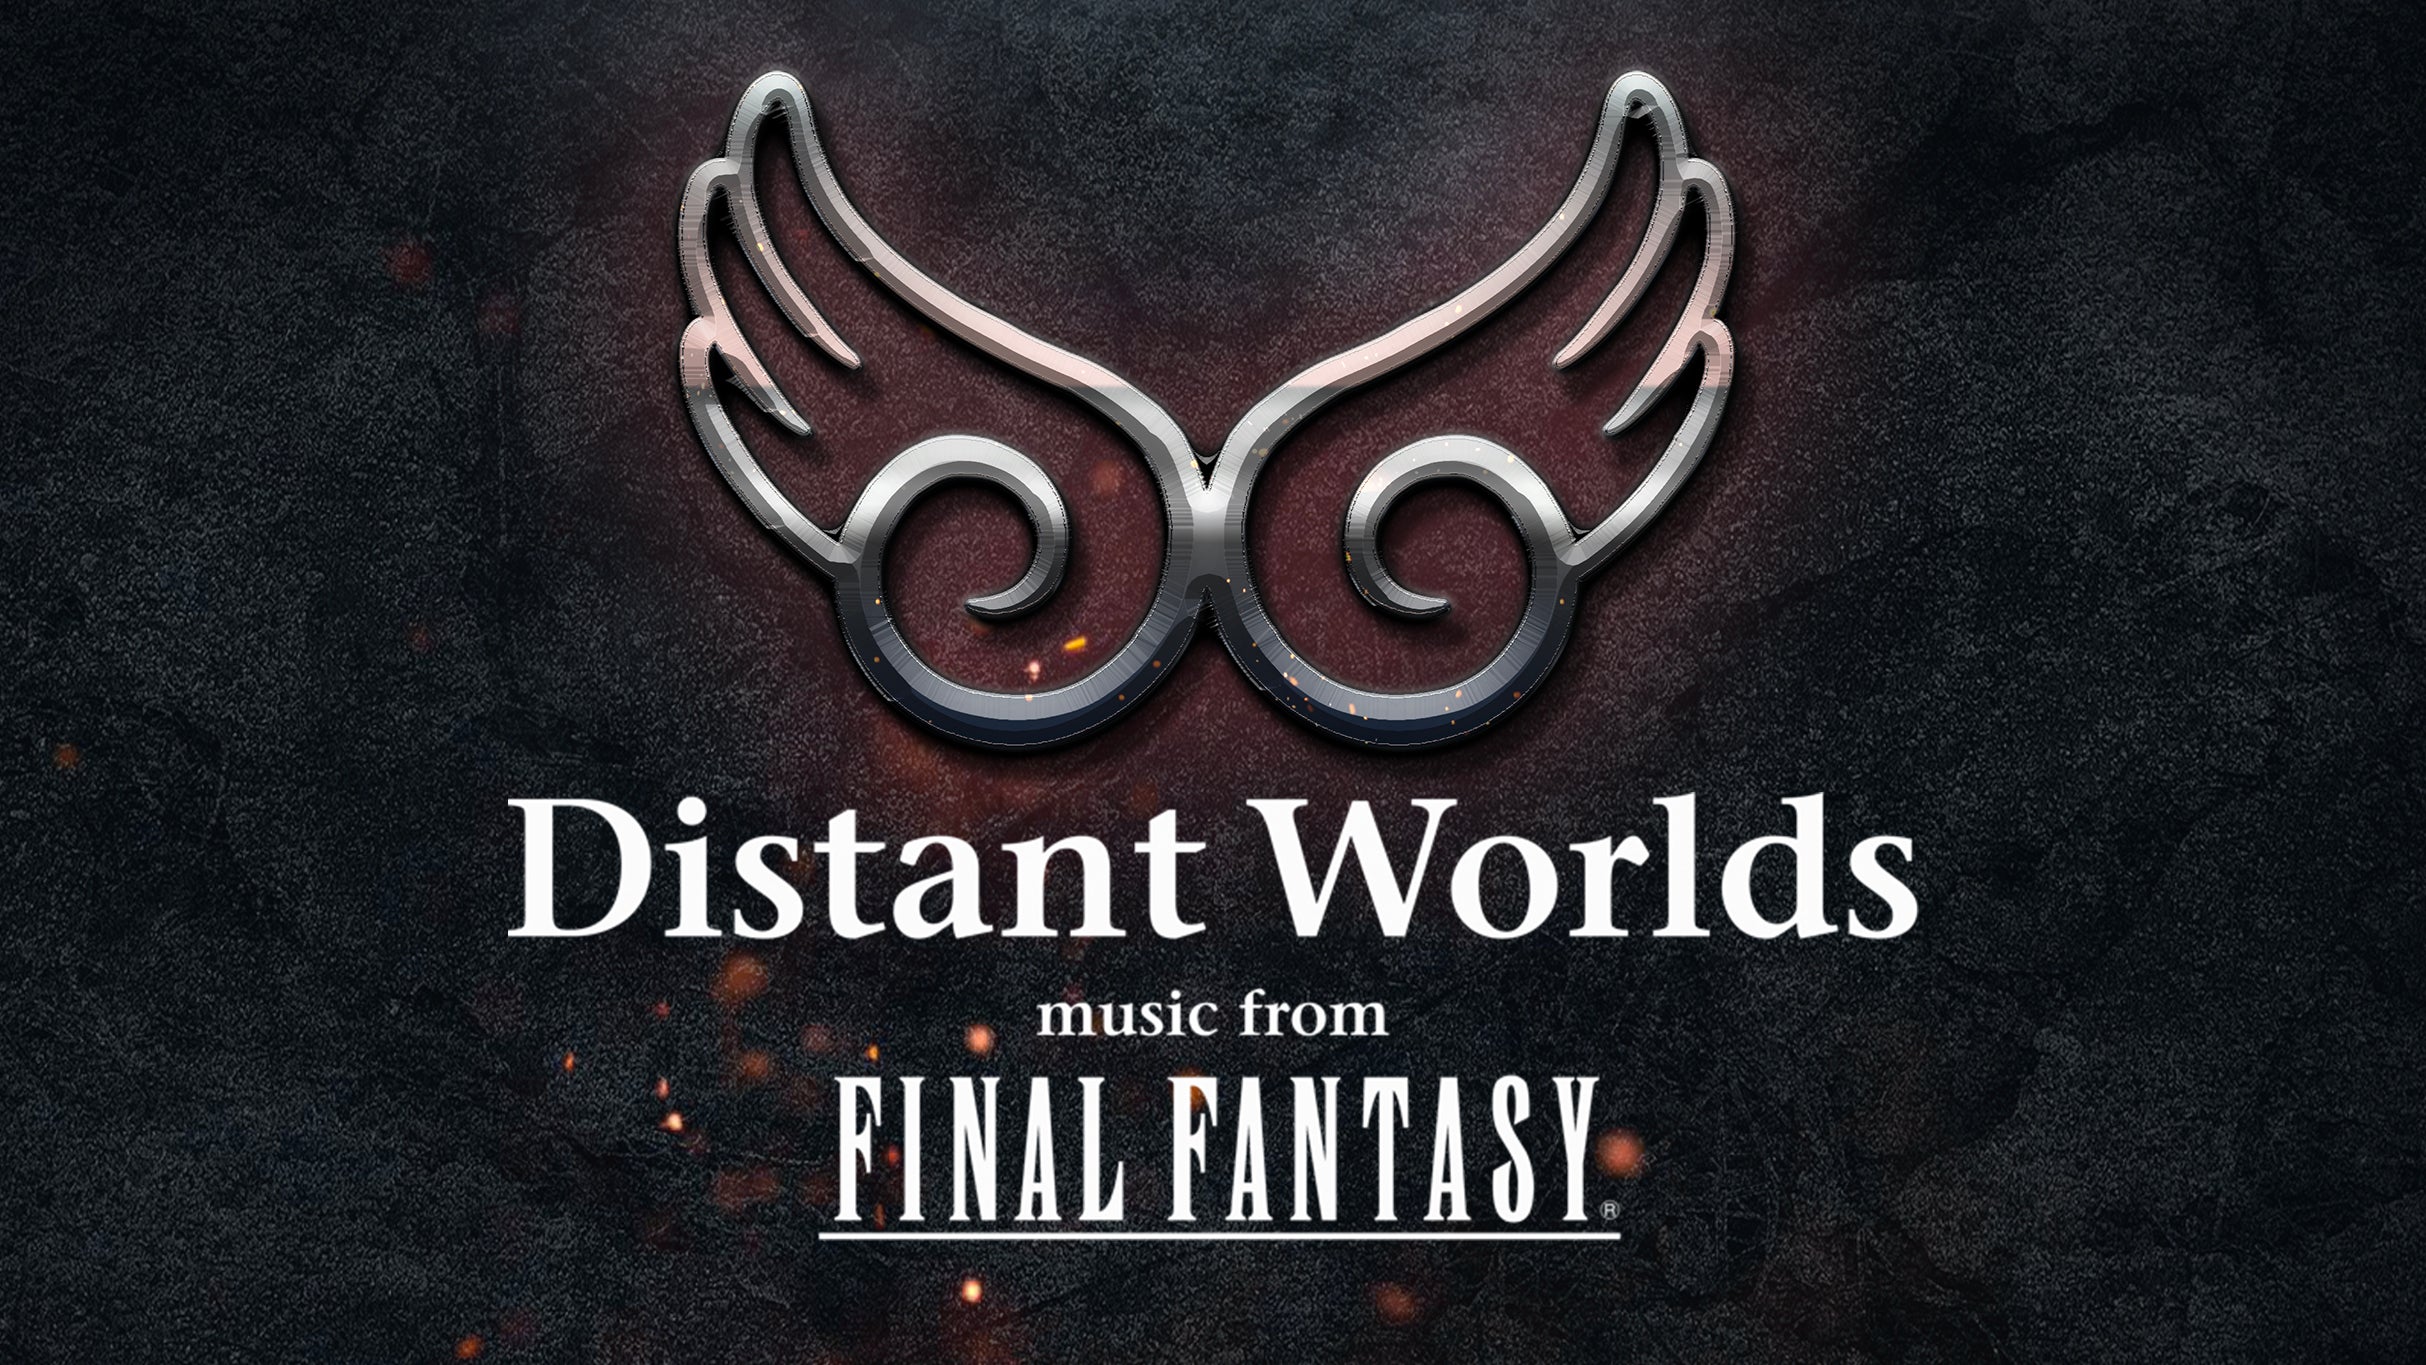 Distant Worlds: music from FINAL FANTASY - Washington, DC 20006